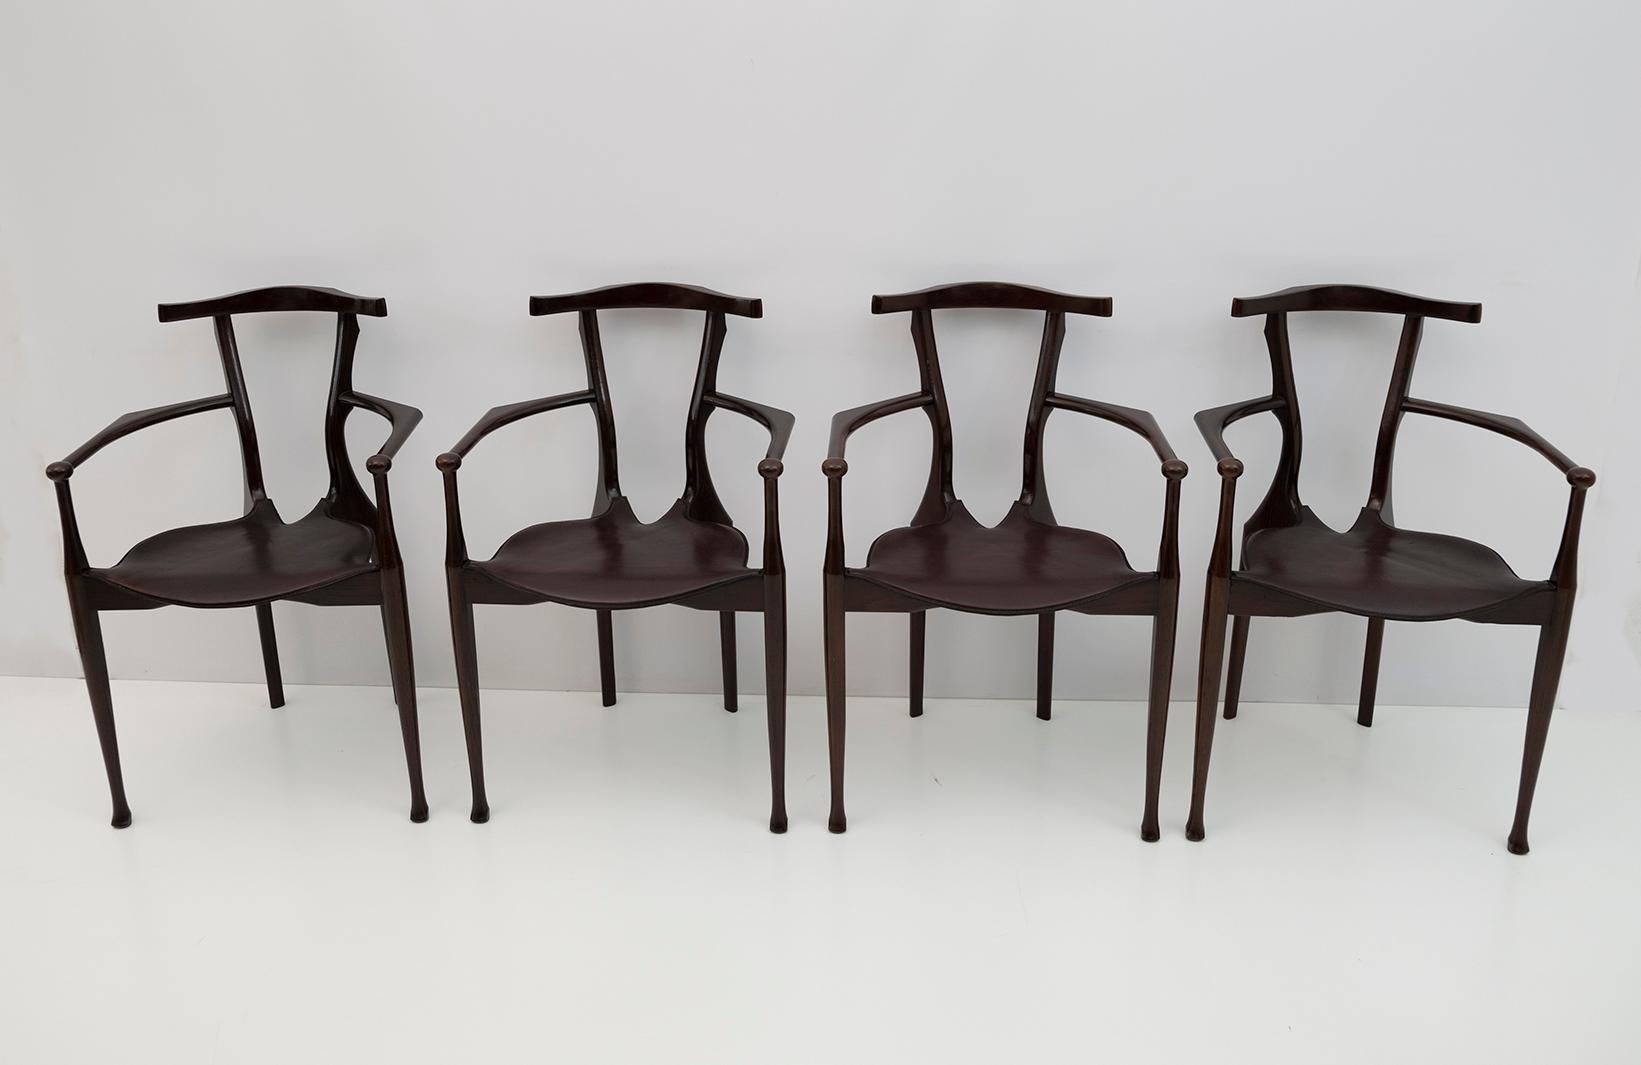 Set of four Gaulino chairs designed in 1987 by Oscar Tusquets in homage to the works of Gaudí and Carlo Mollino. First edition for Carlos Jané in mahogany stained oak and leather seats.